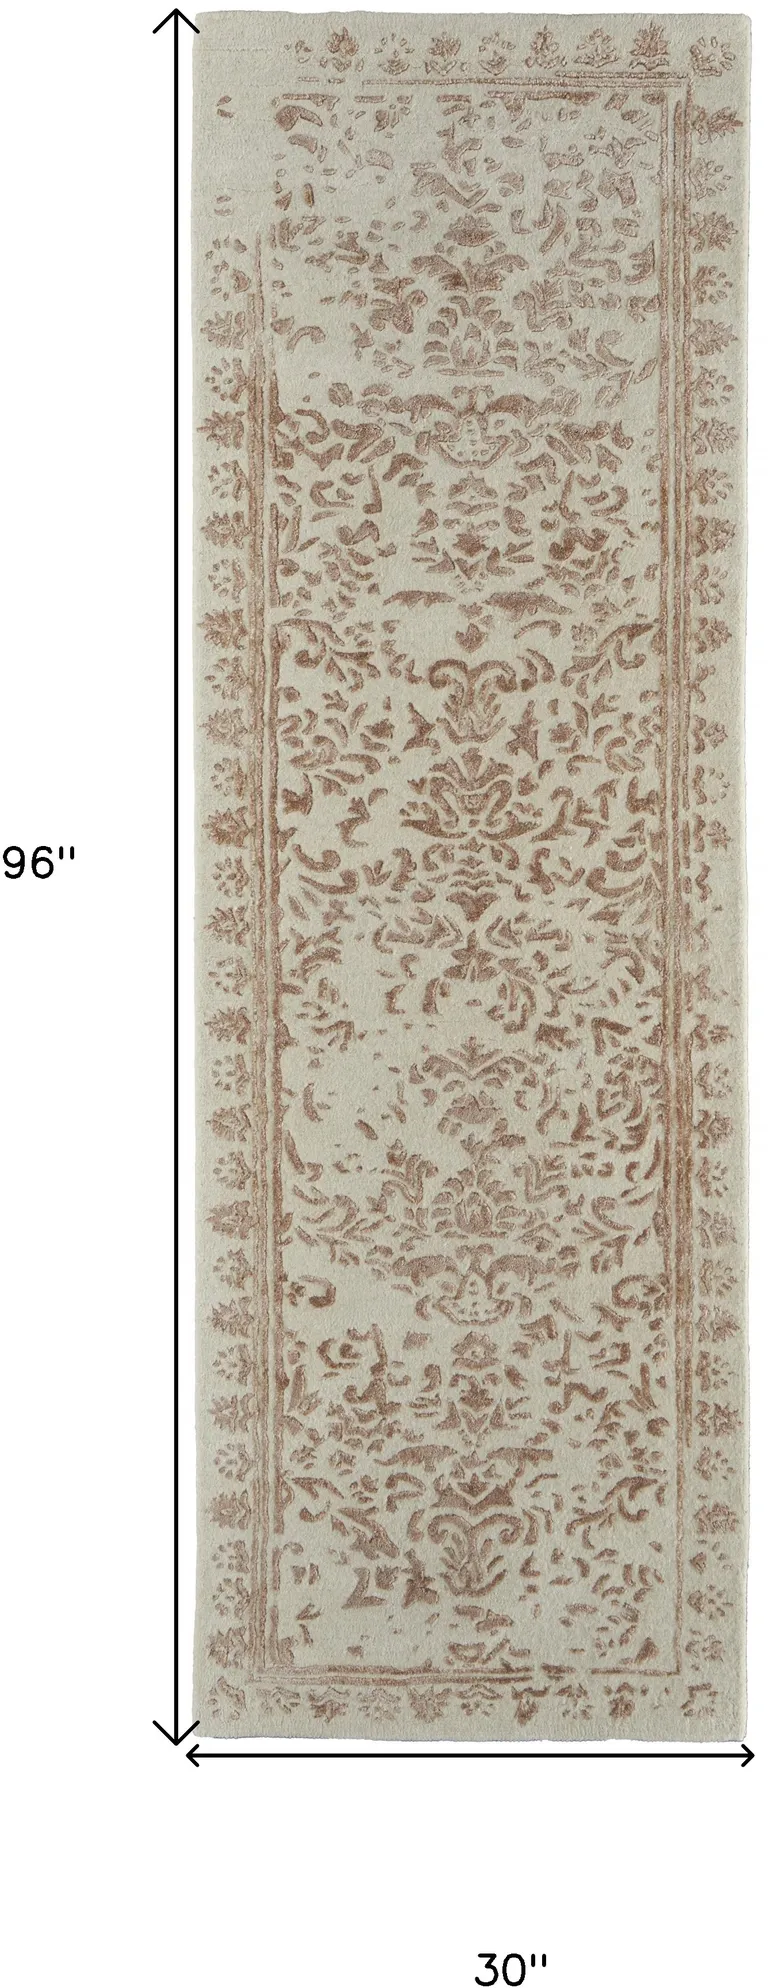 8' Ivory Tan And Pink Wool Floral Tufted Handmade Distressed Runner Rug Photo 4